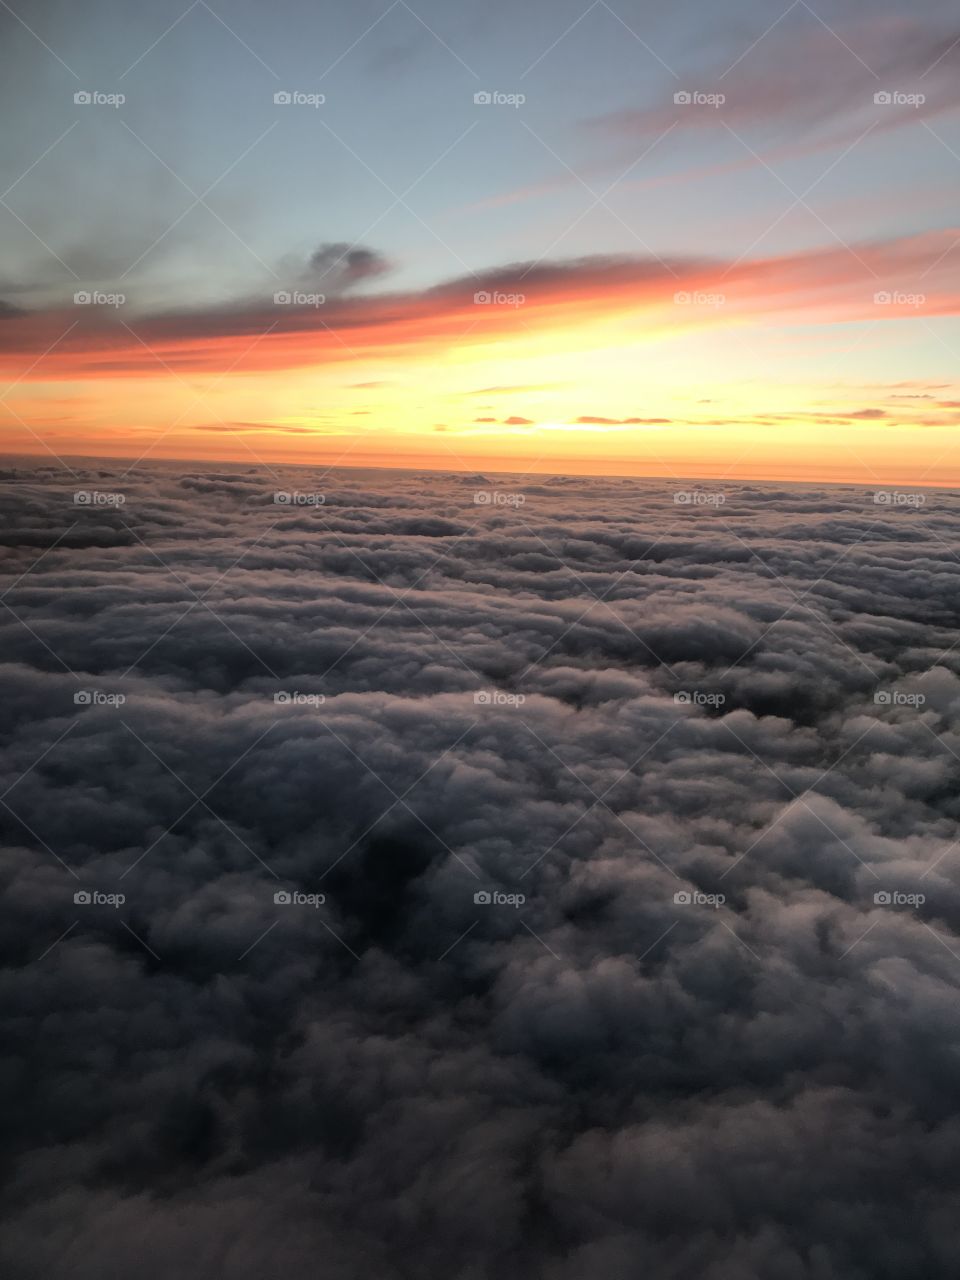 Sunset above the clouds